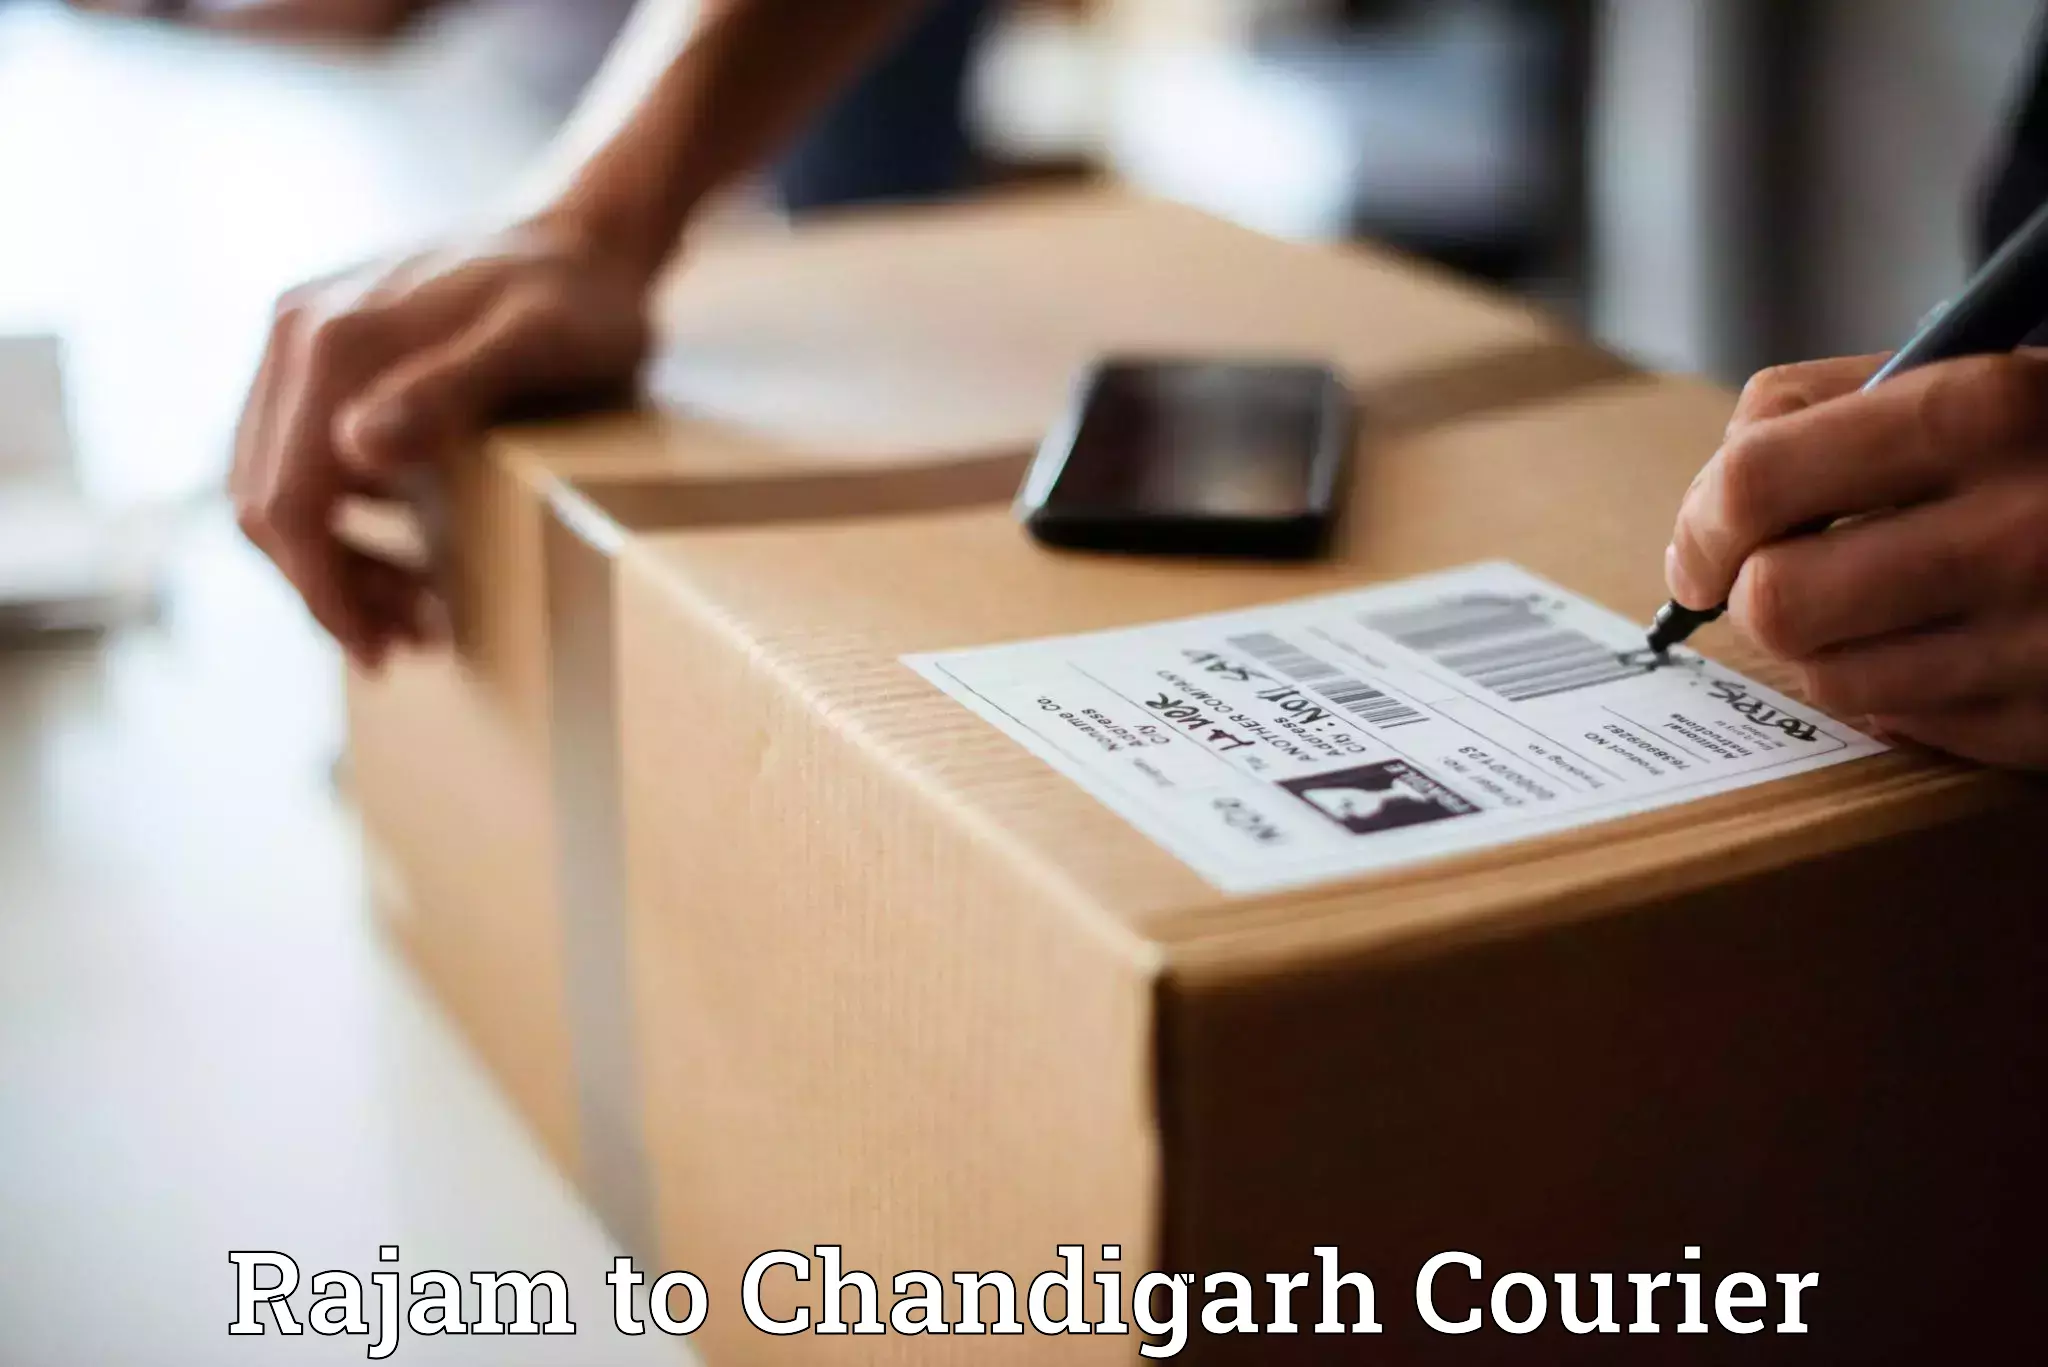 Global shipping networks Rajam to Chandigarh